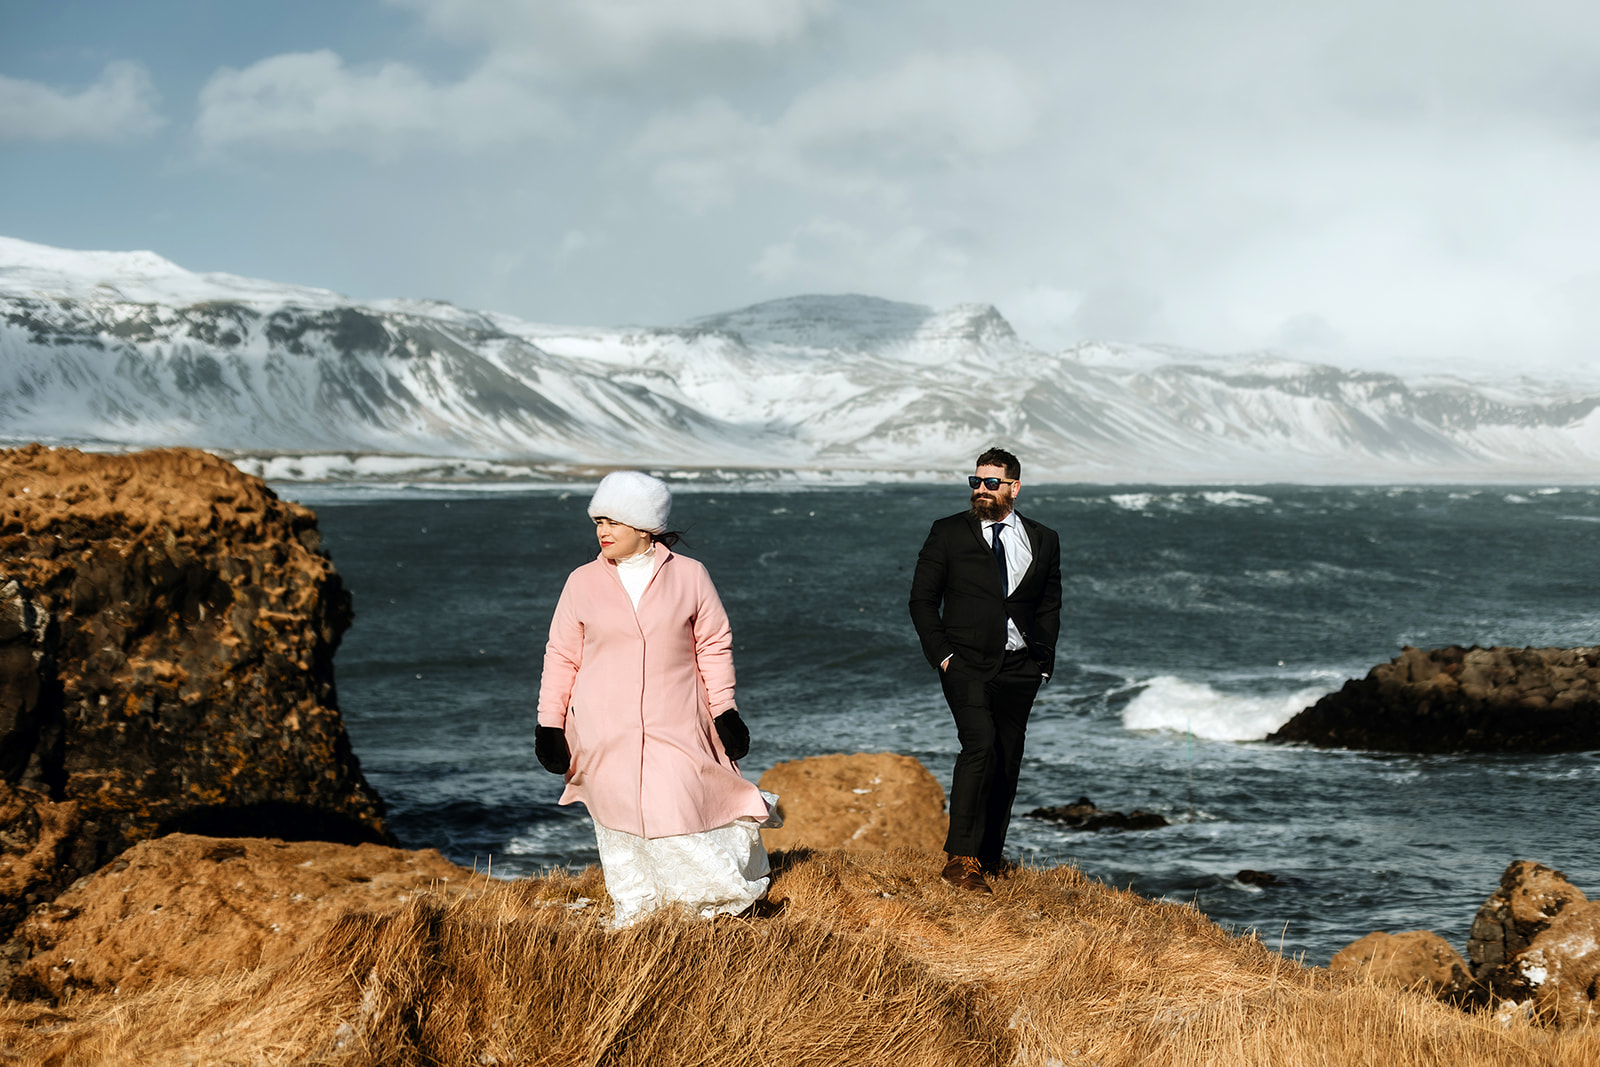 Married couple is hugging in front of a stormy Ocean in Iceland on their wedding day